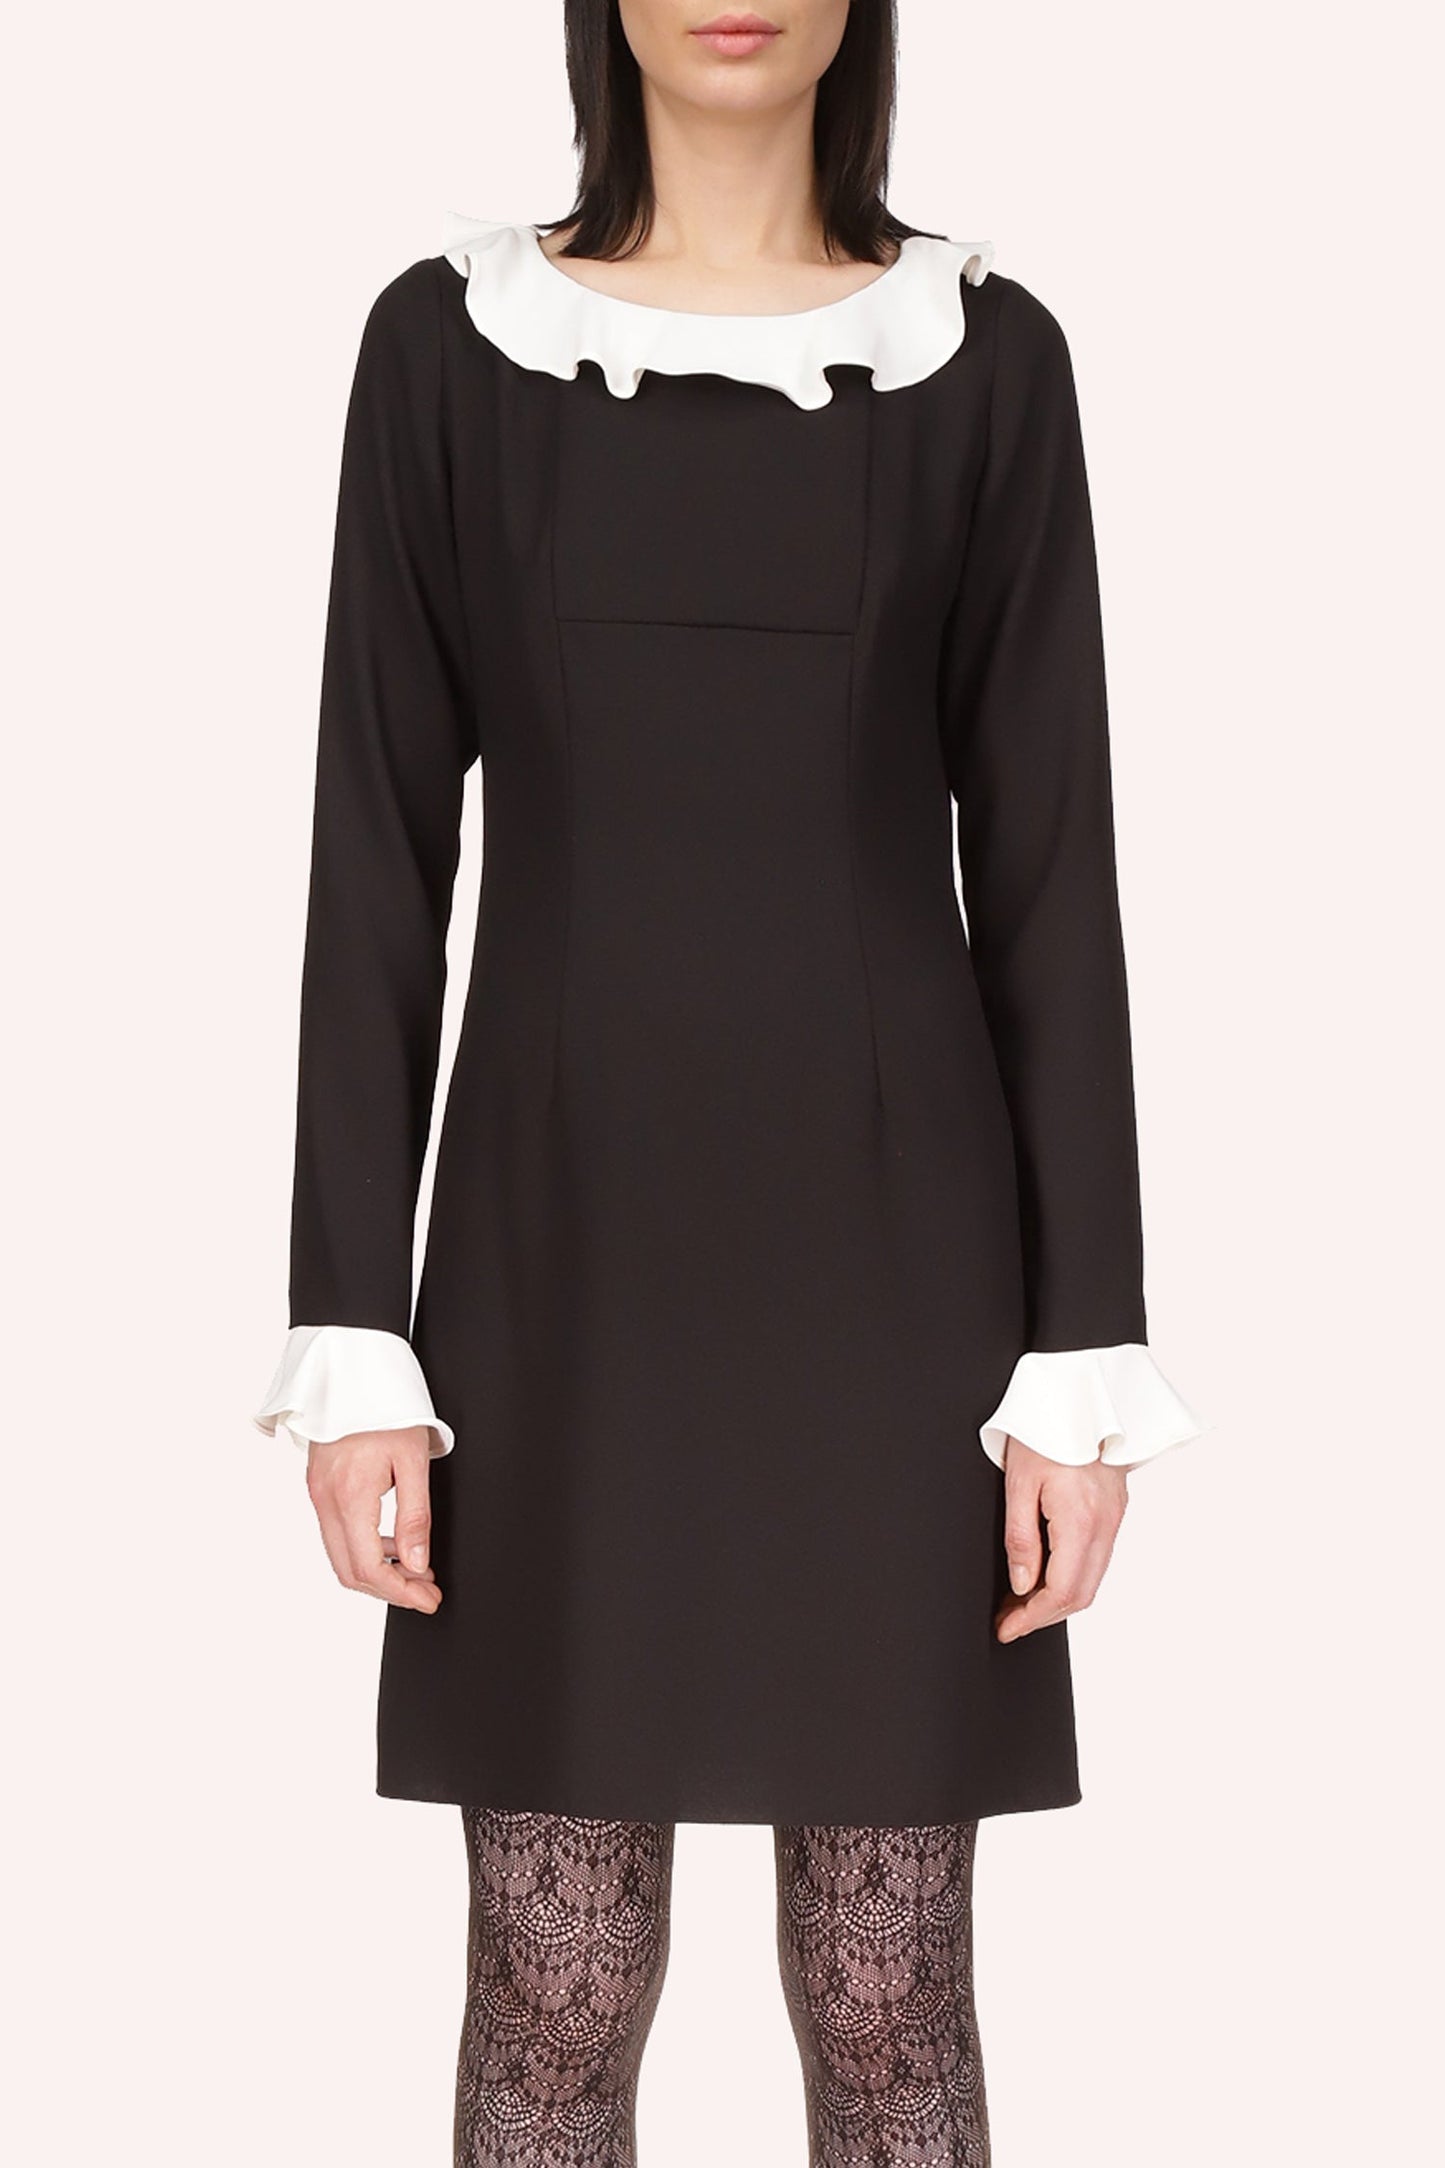 Combo Crepe Dress, above-the-knee, vanilla crepe on the long sleeves and collar borders.